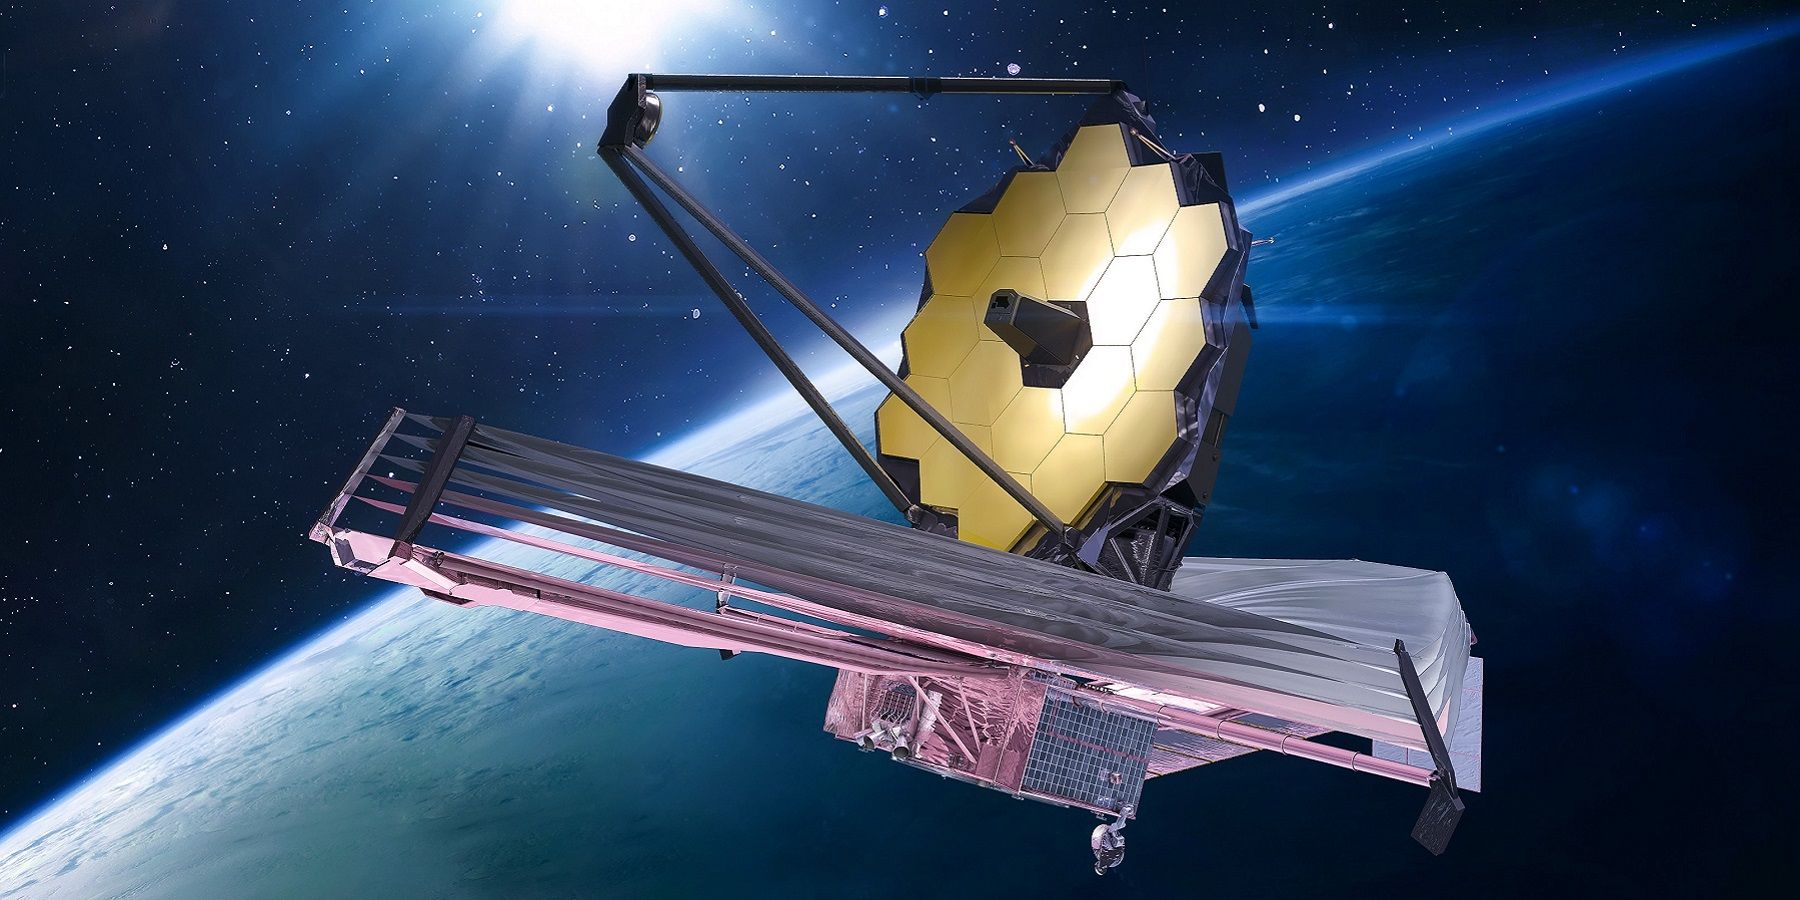 Rendered image of the James Webb telescope floating in space with a planet in the background.